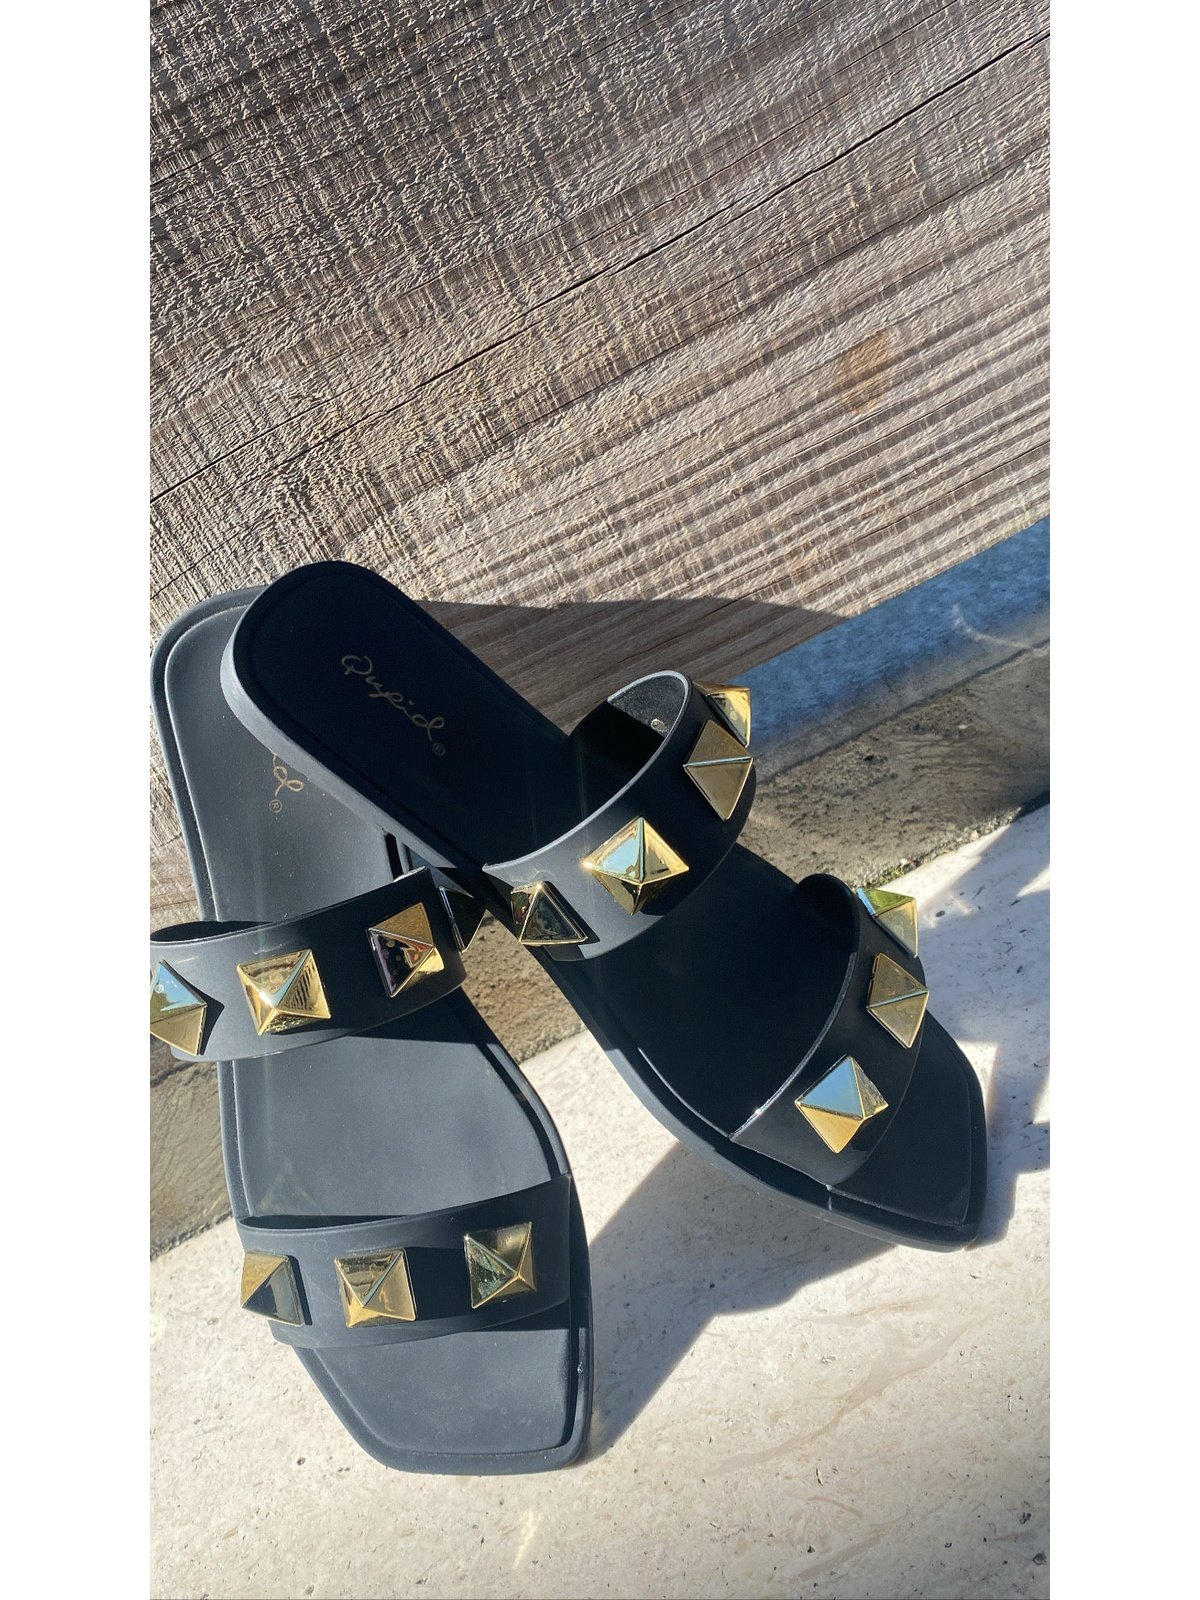 Studded Double Strap Flat Sandals (SIZE 5)